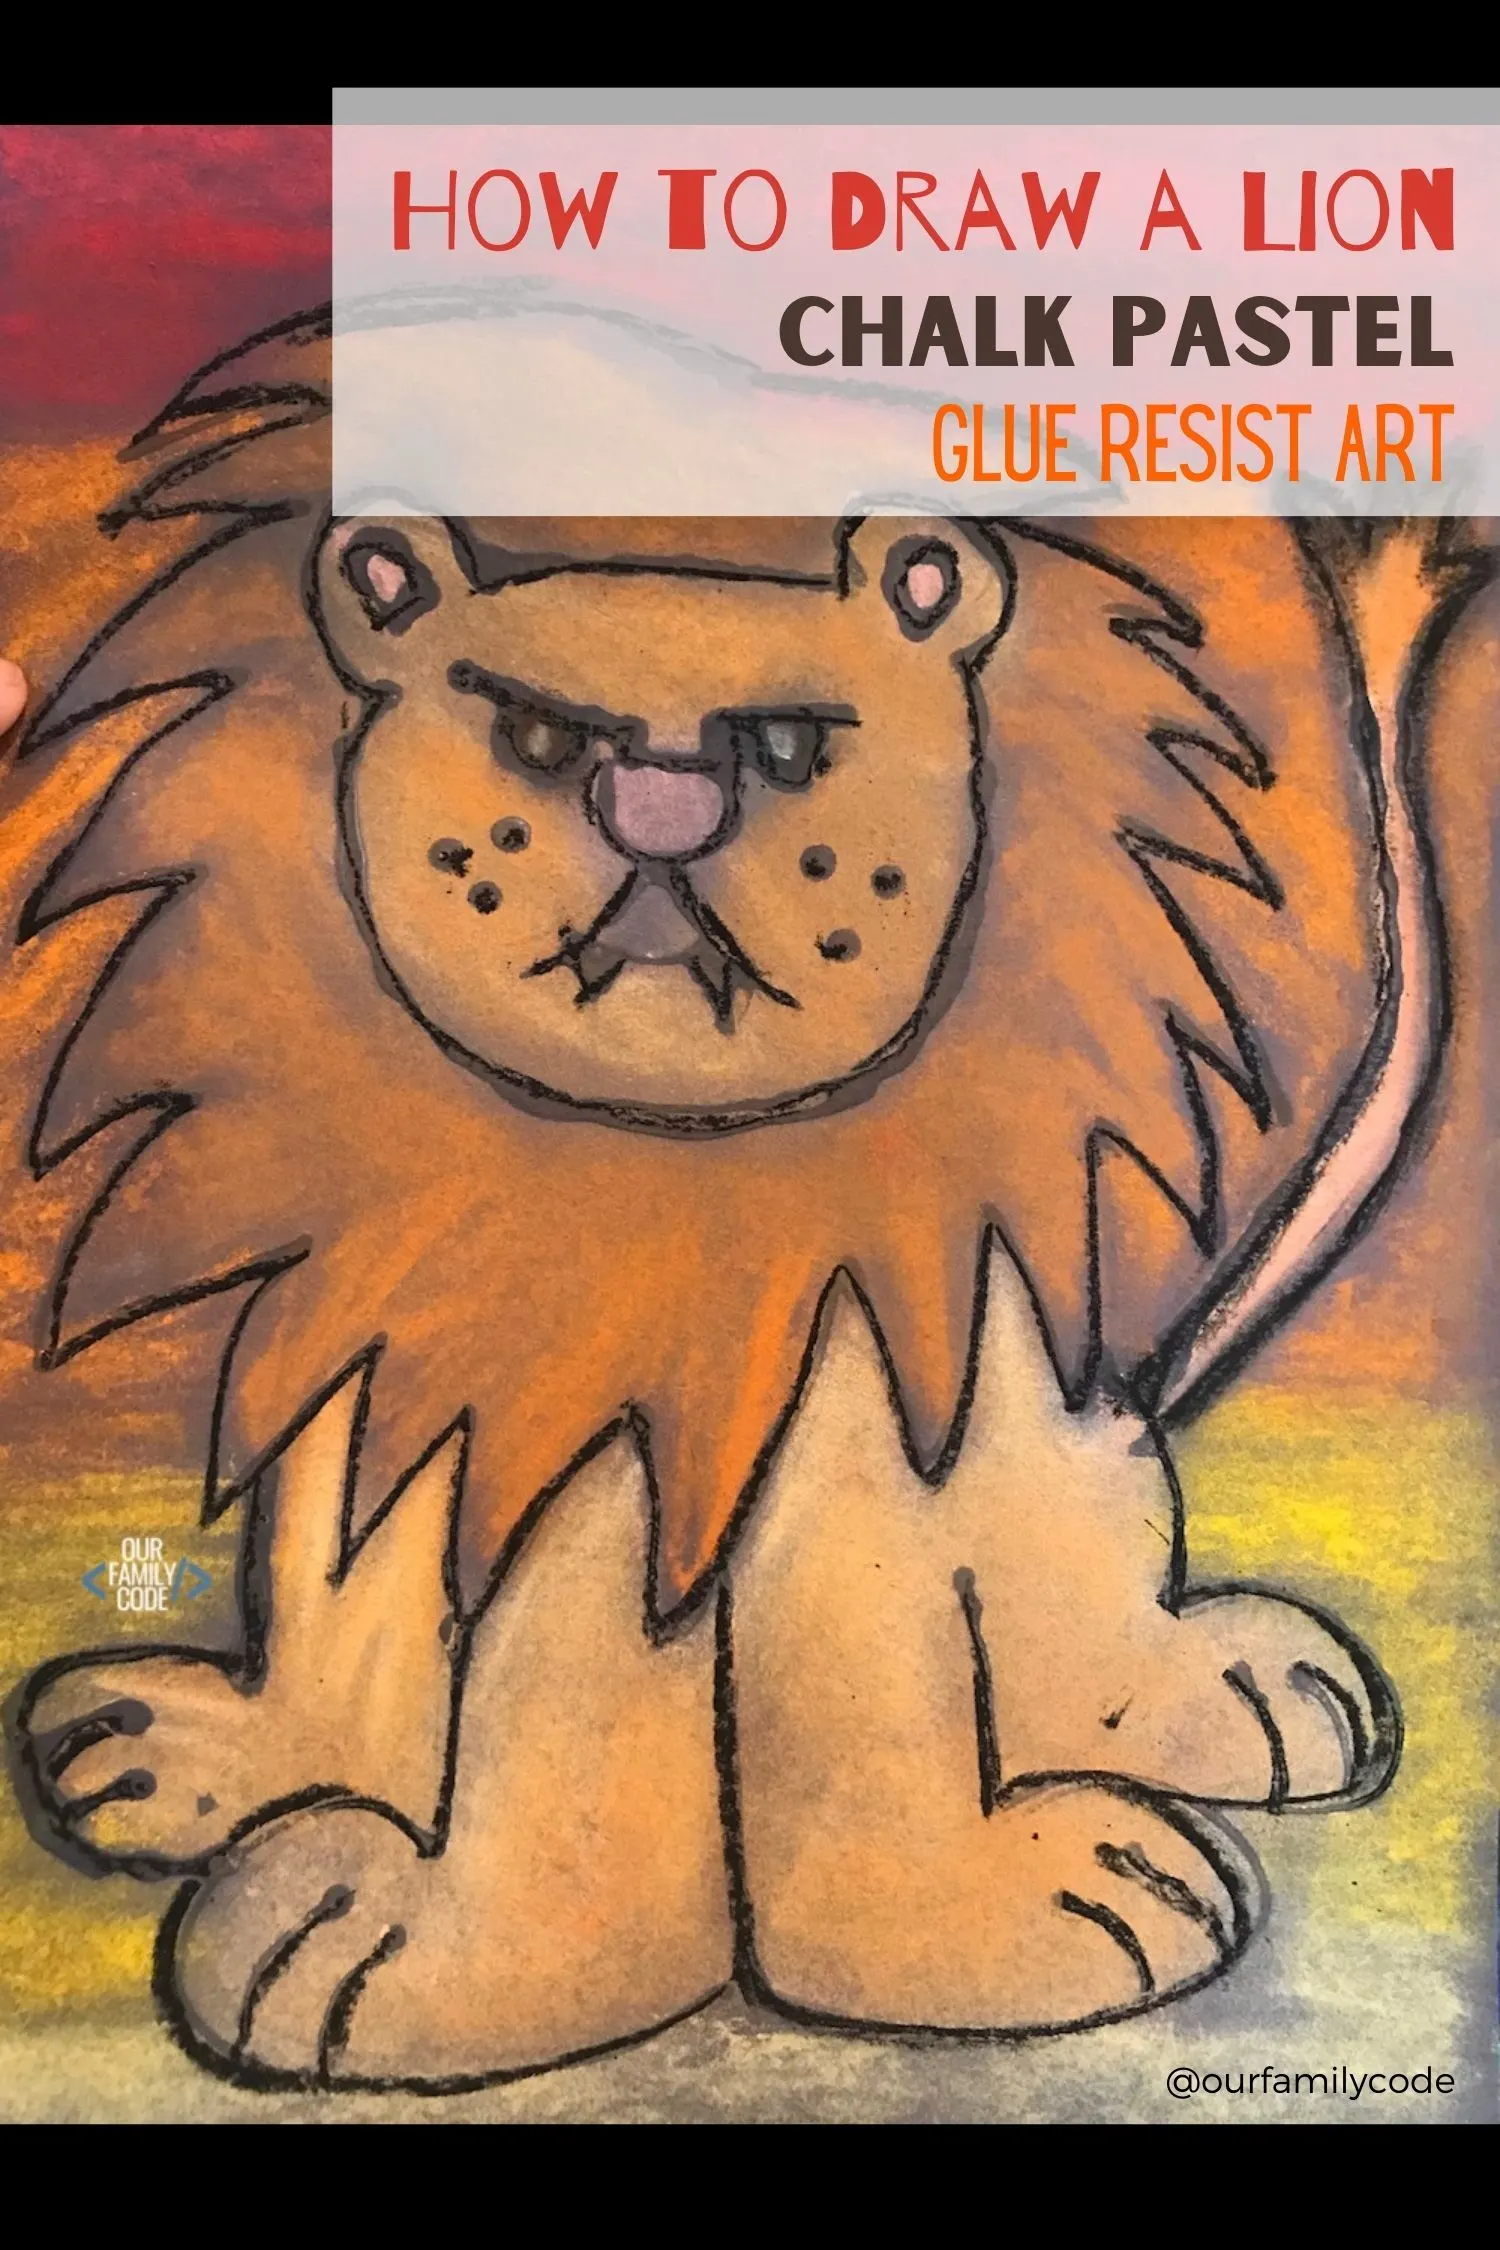 A picture of how to draw a lion chalk pastel glue resist art.